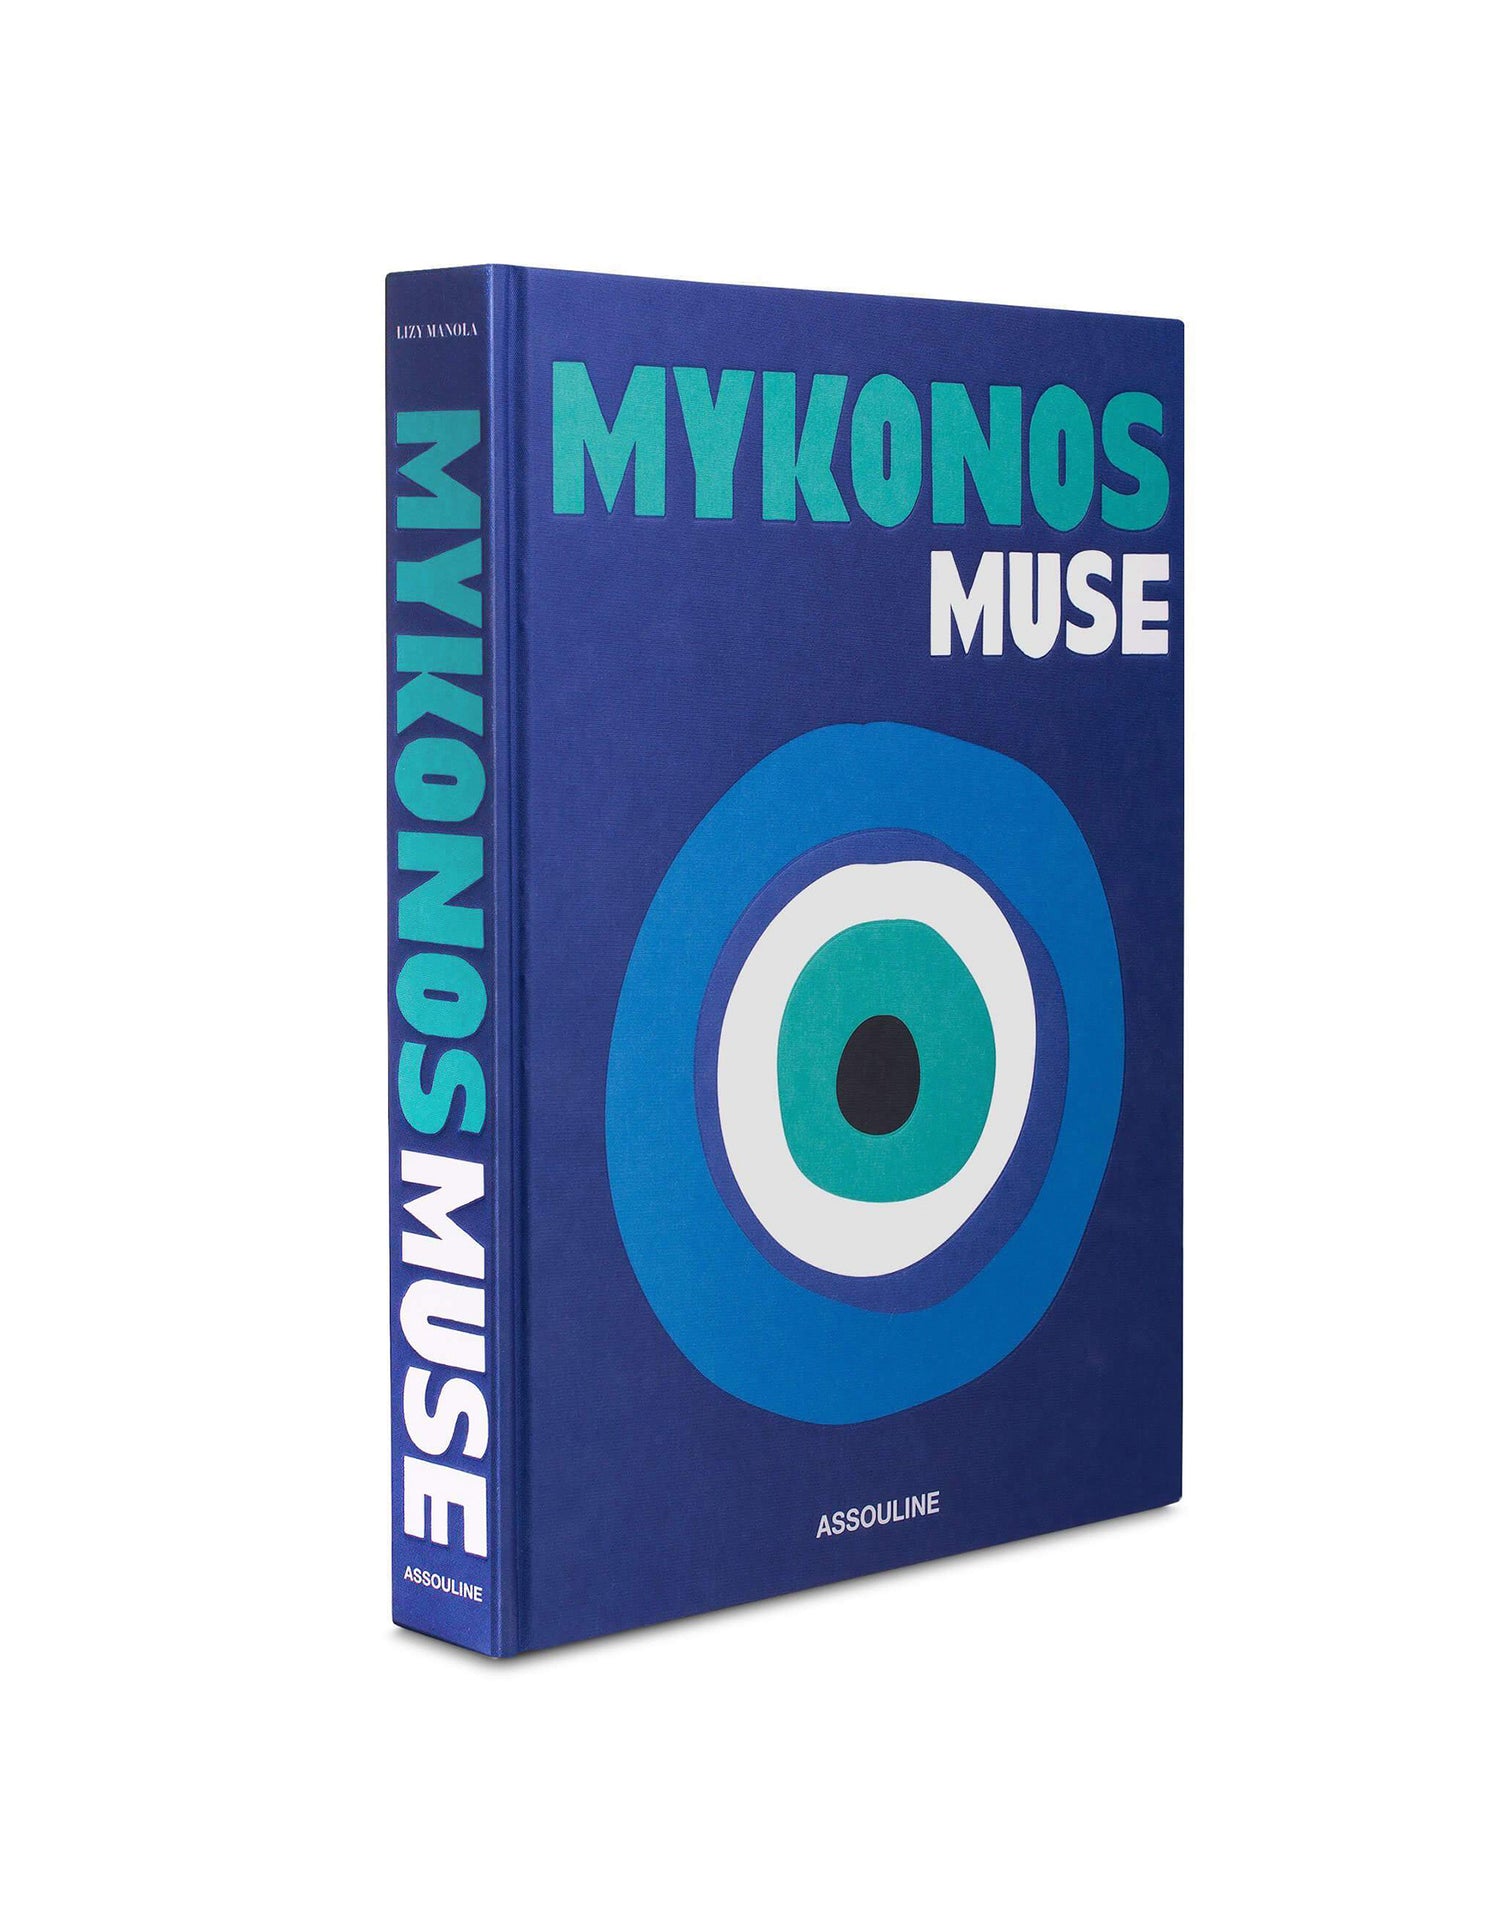 Mykonos Muse Book by Assouline - Angled View